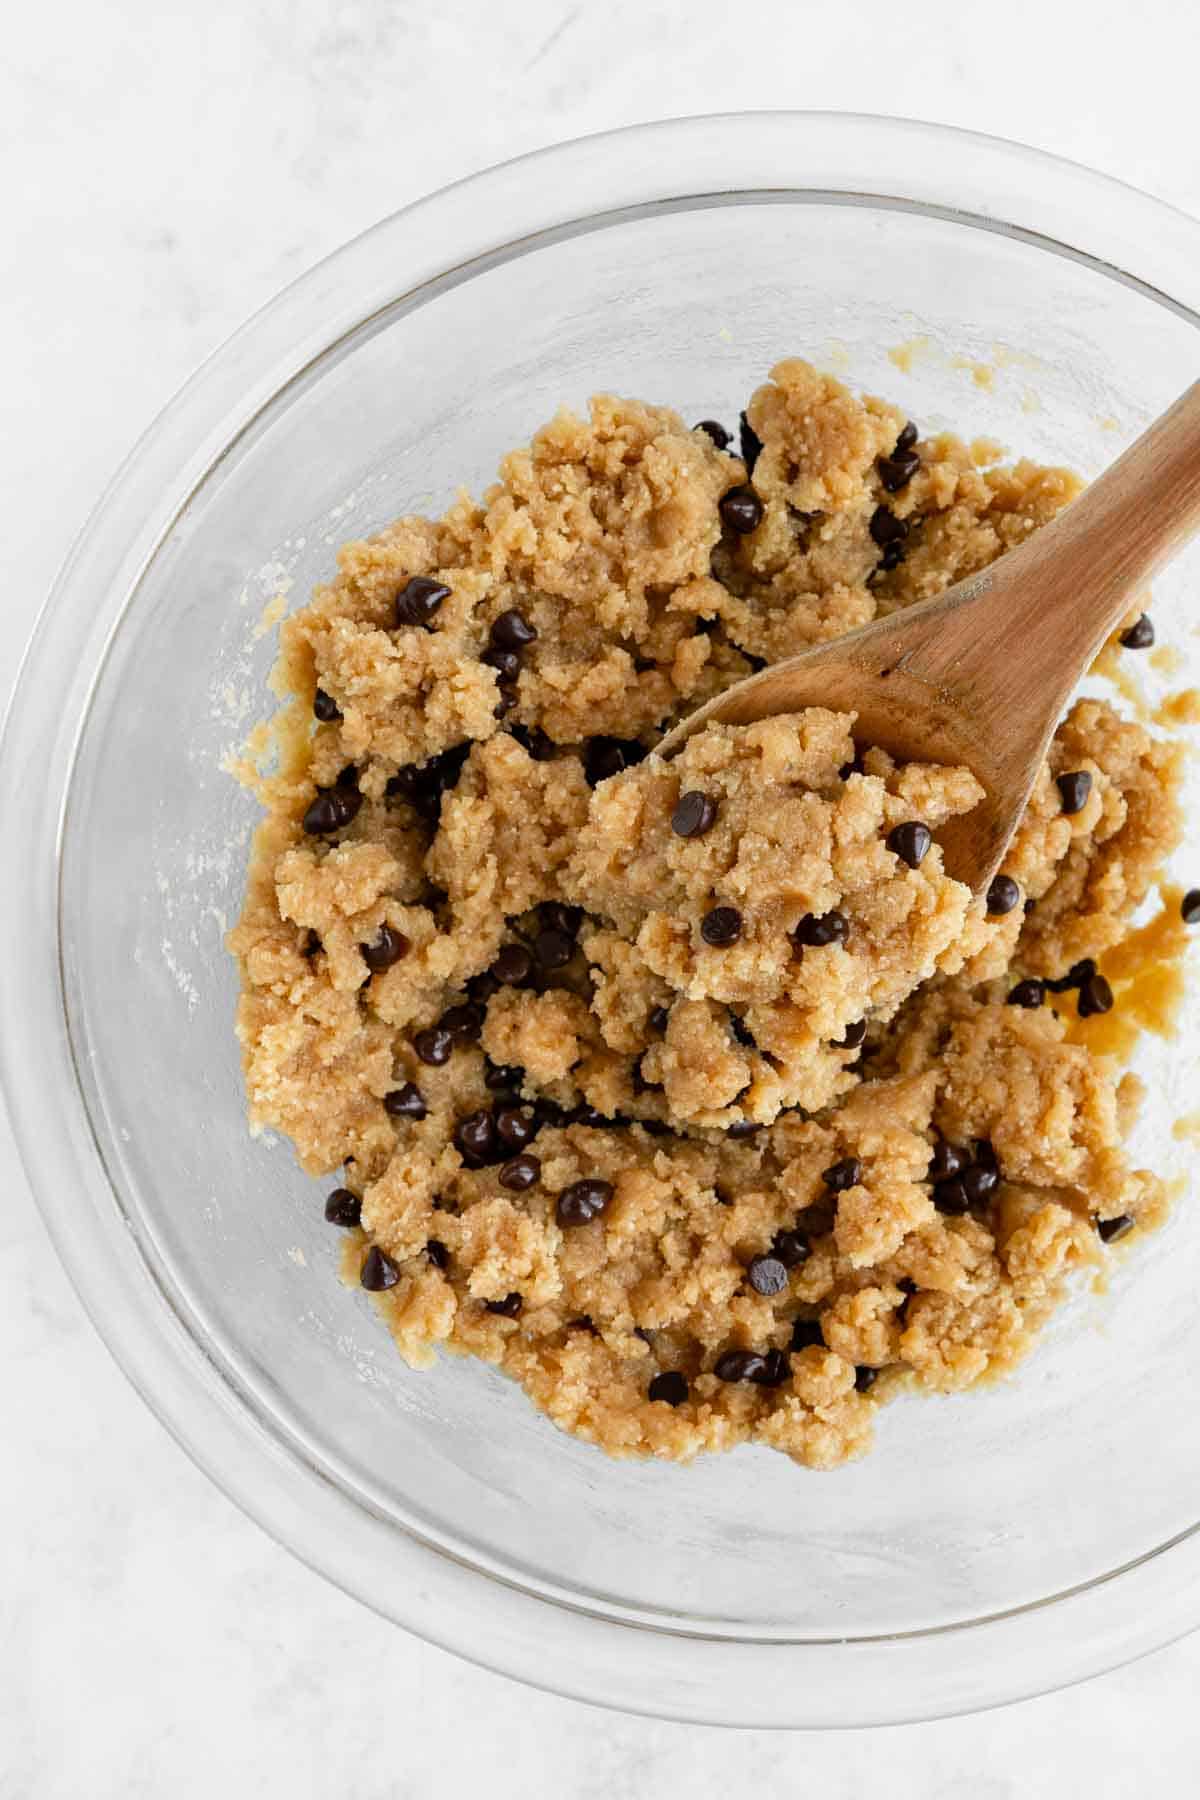 a wooden spoon scooping healthy edible cookie dough in a glass boiwl